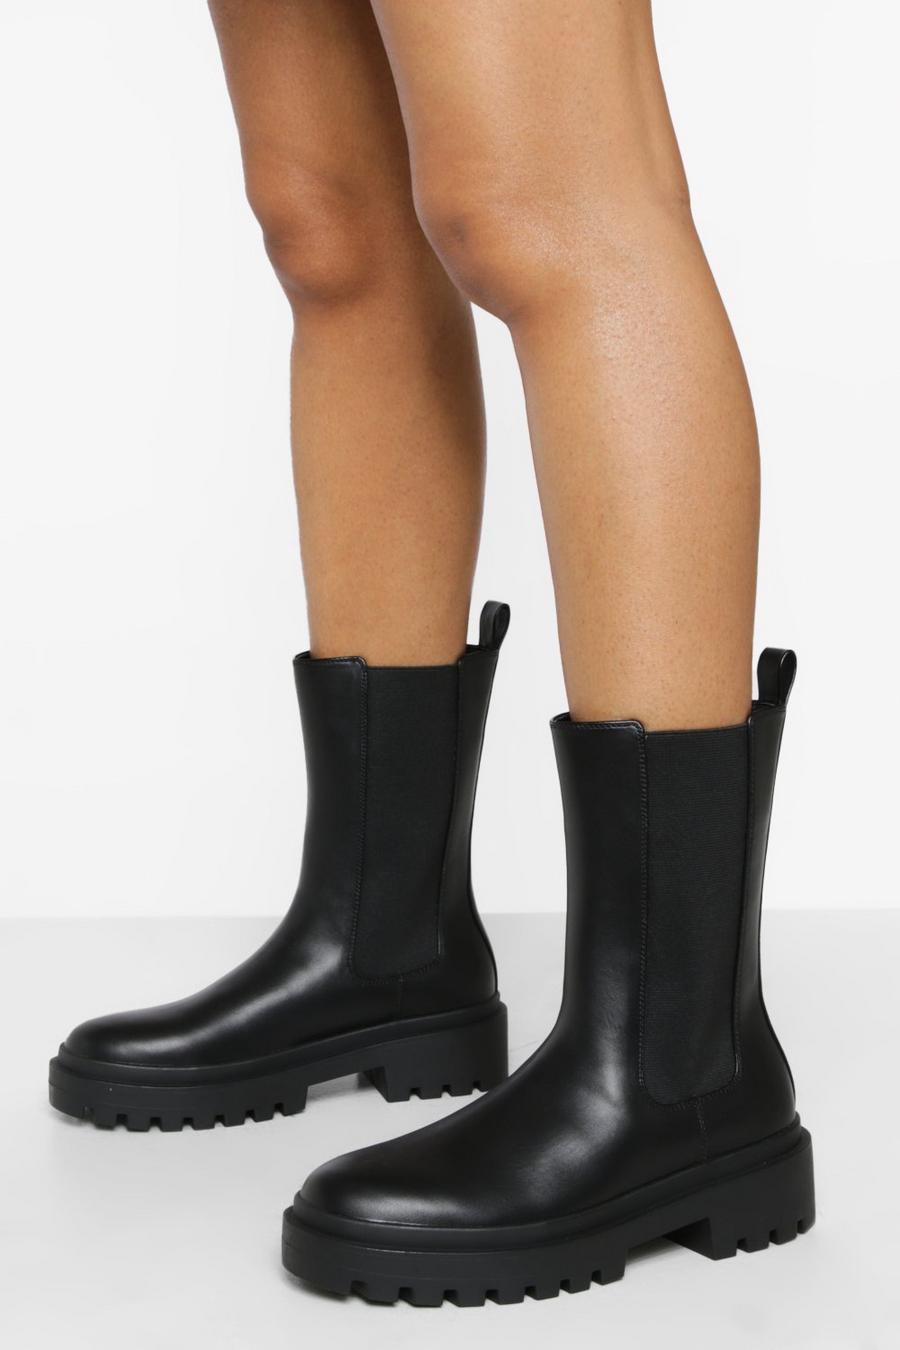 Double Sole Calf Height Chelsea Boots | boohoo